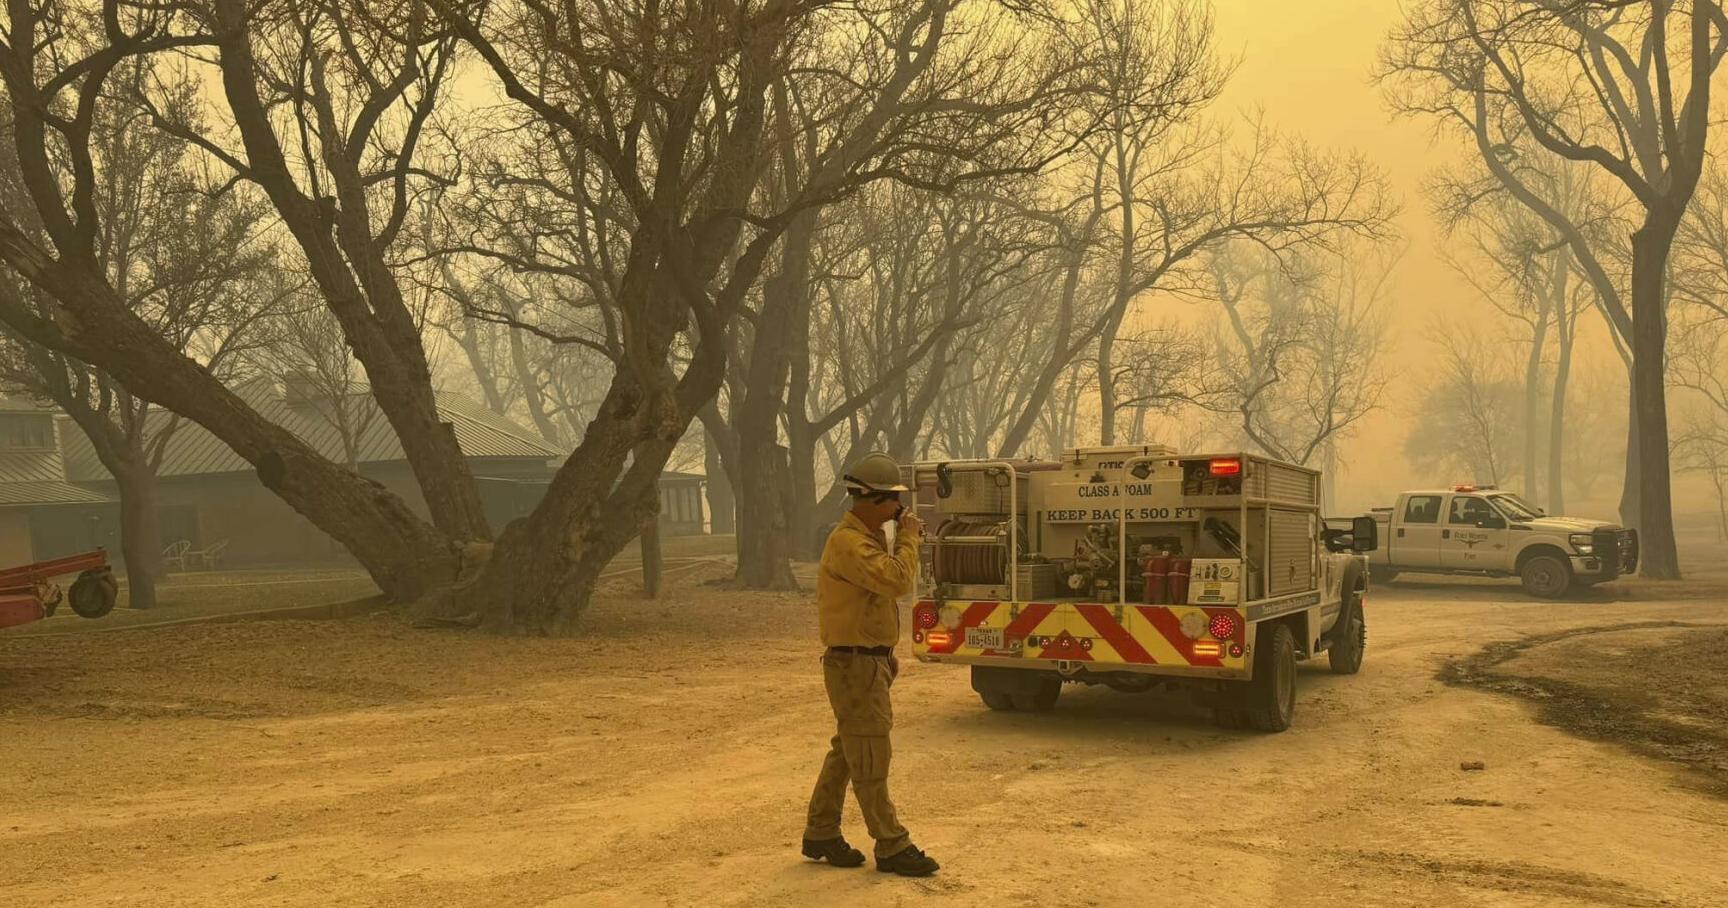 Wildfires scorch Texas Panhandle; Warning signs for Trump and Biden; Ohtani goes deep in first game with Dodgers | Hot off the Wire podcast